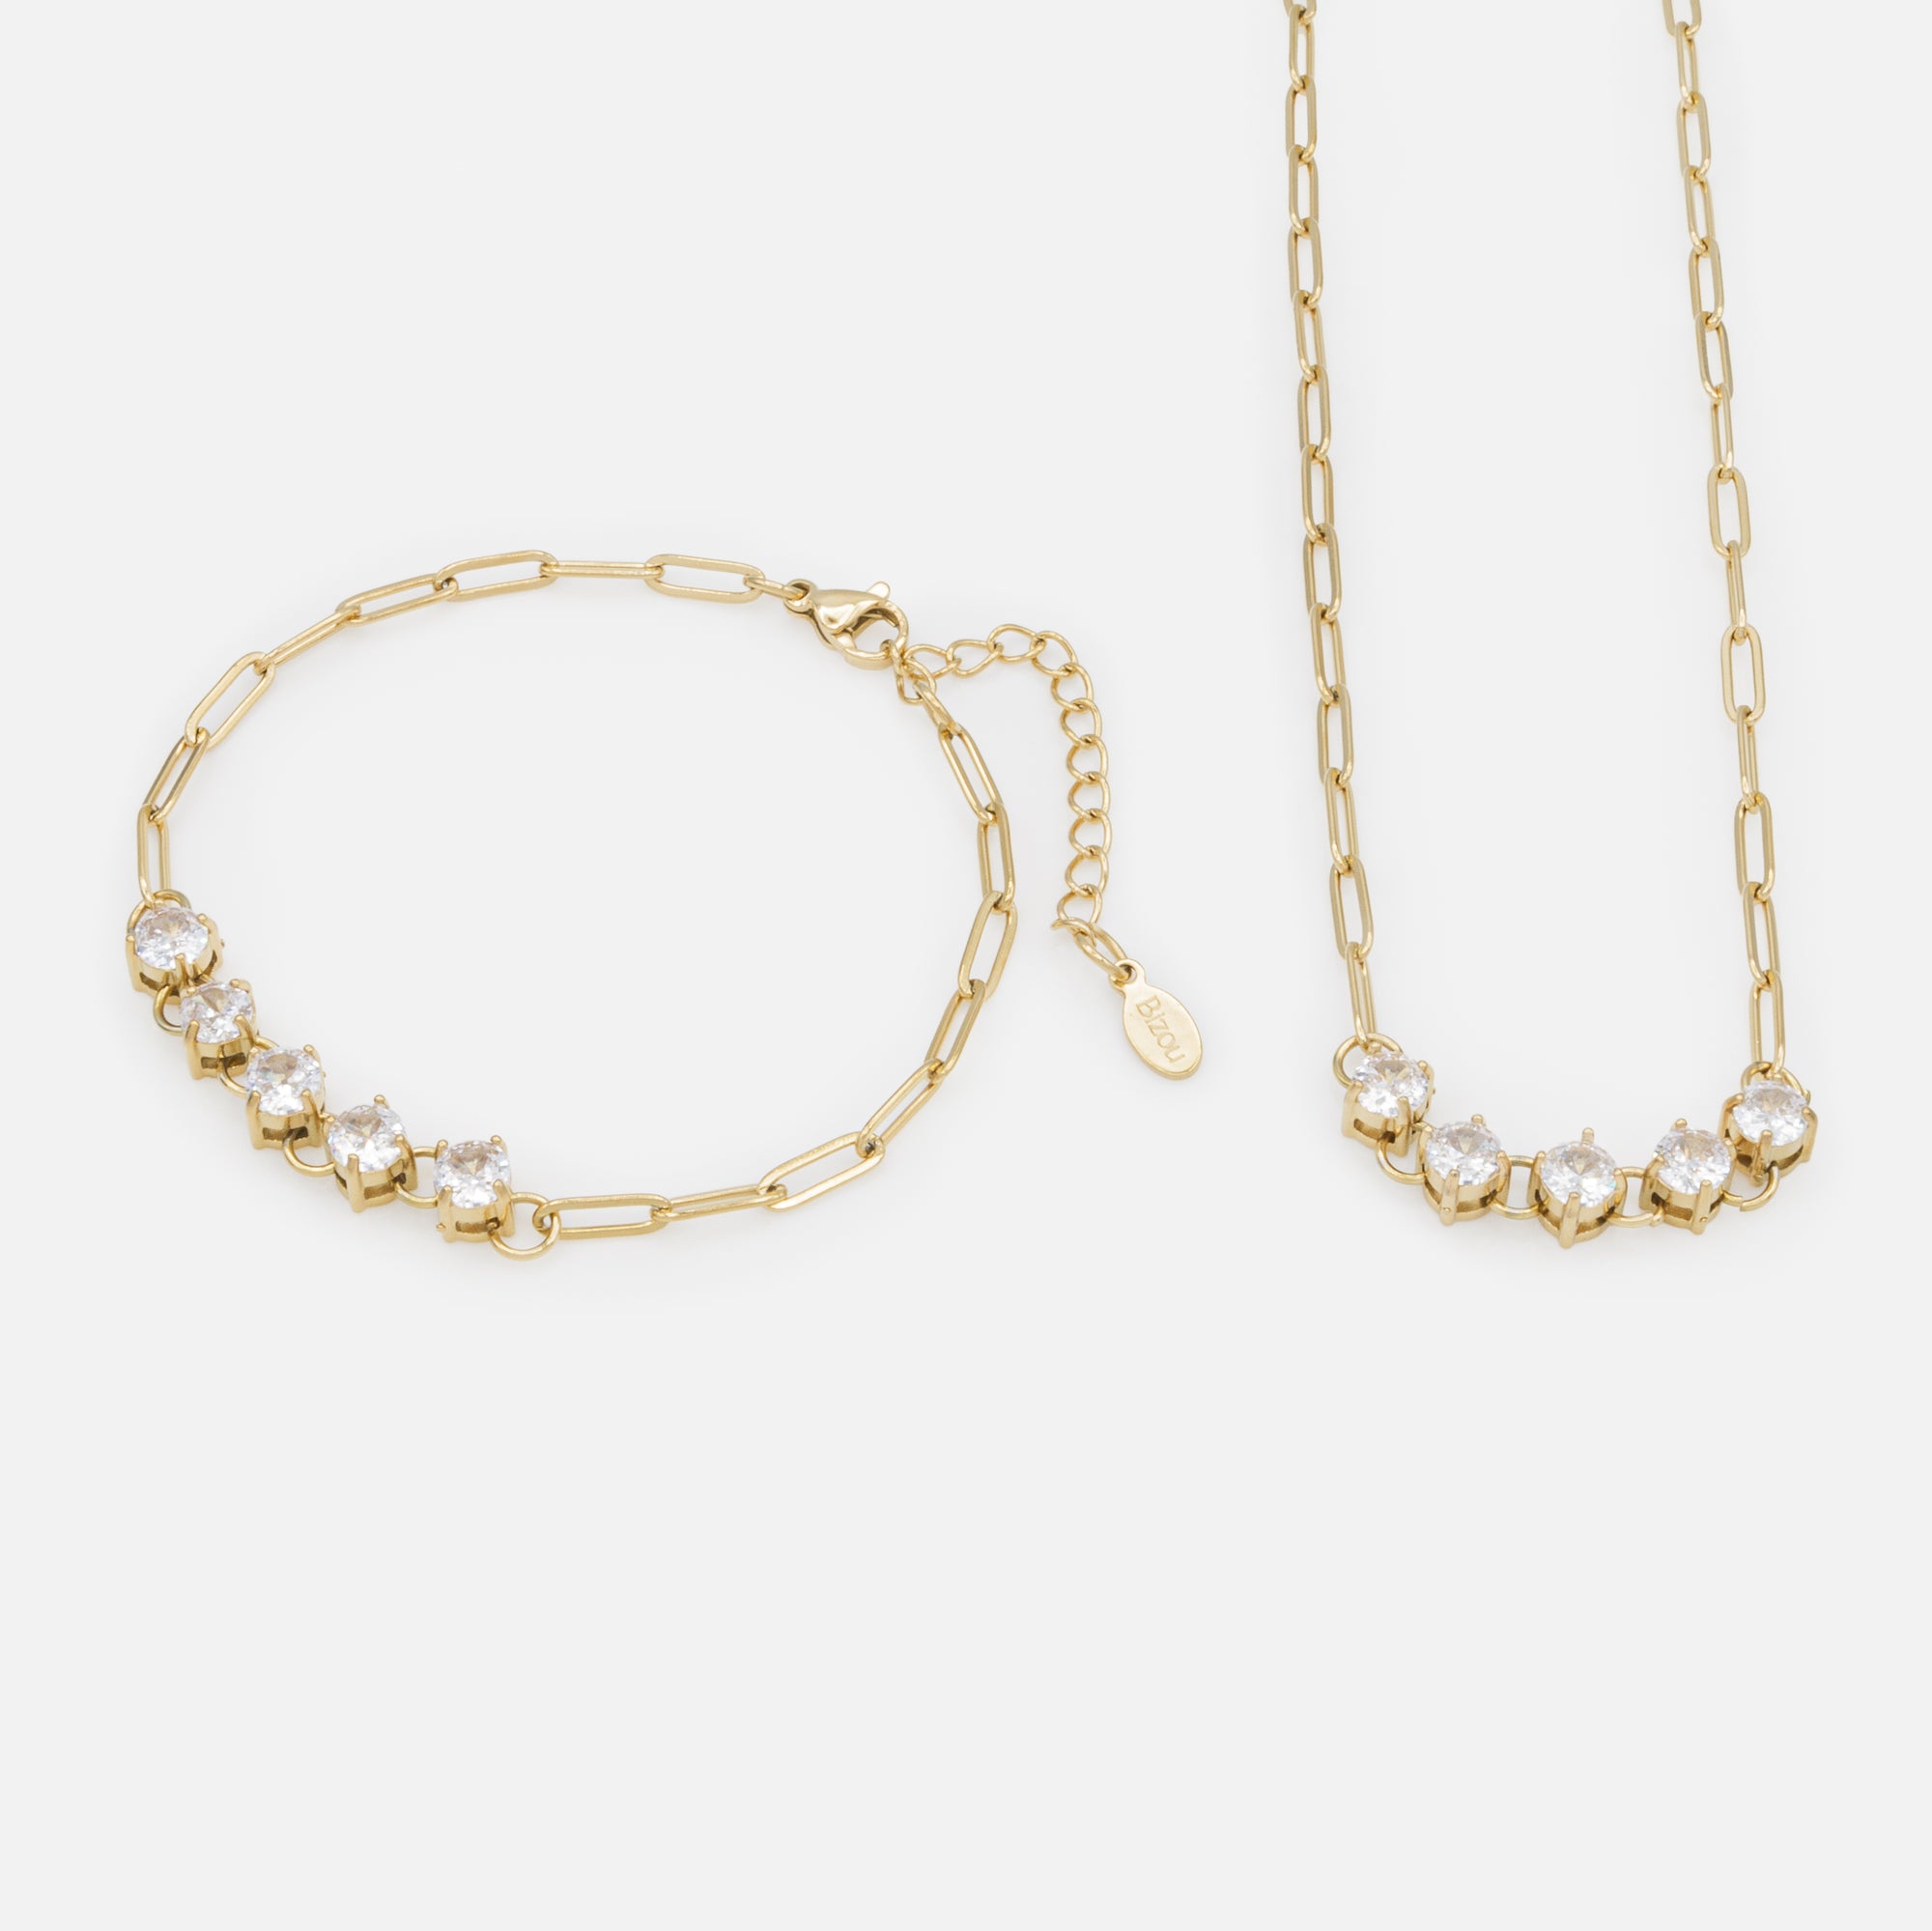 Gold paper clip chain necklace and bracelet set with stainless steel cubic zirconia